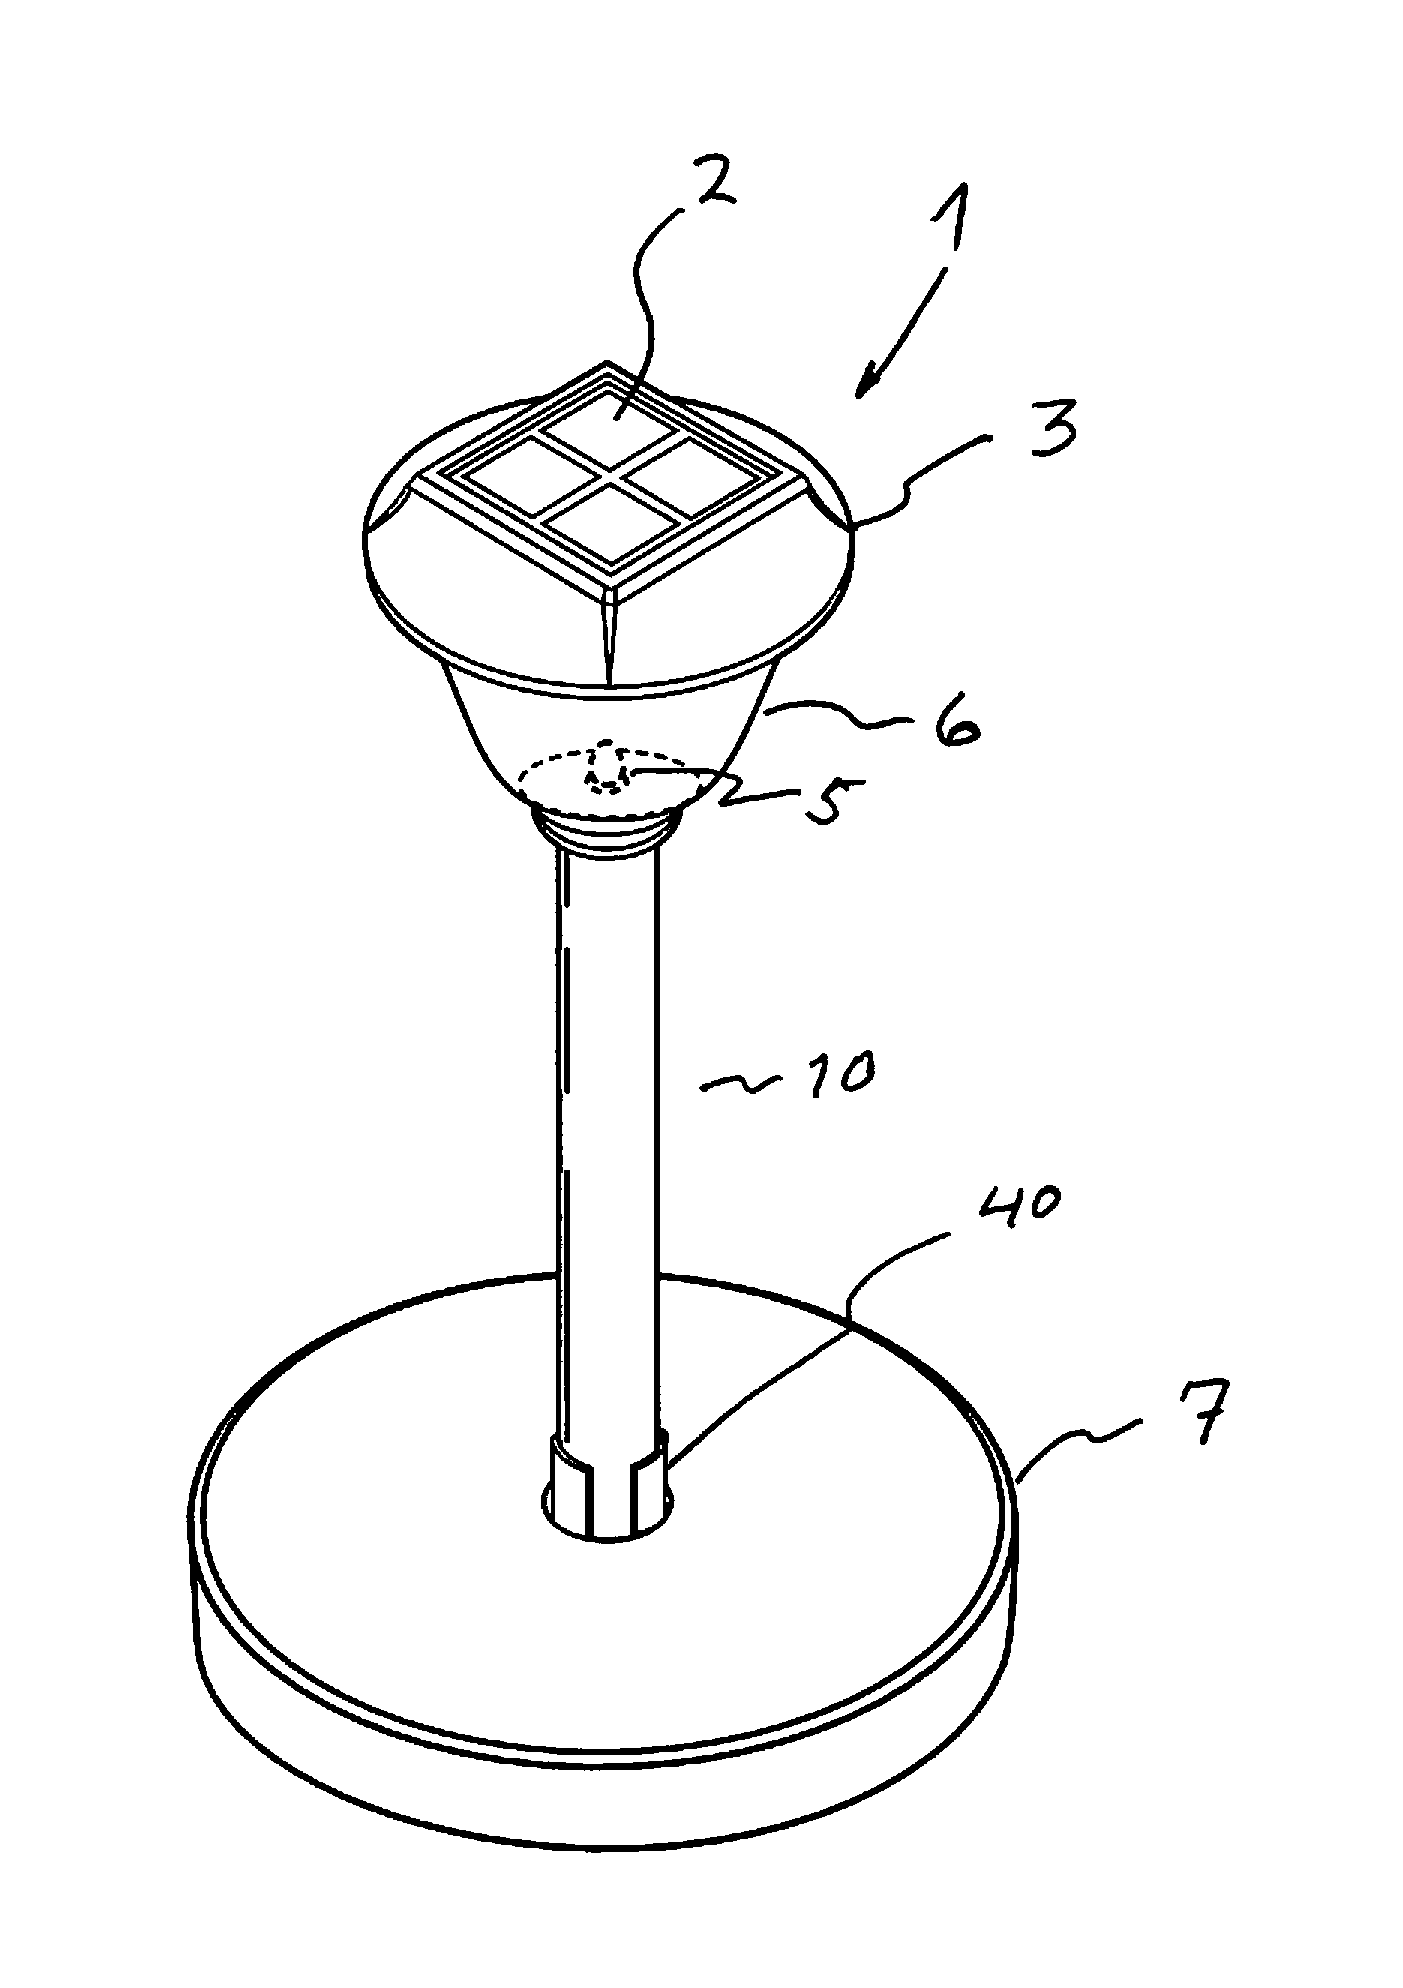 Portable Path Light System and Method